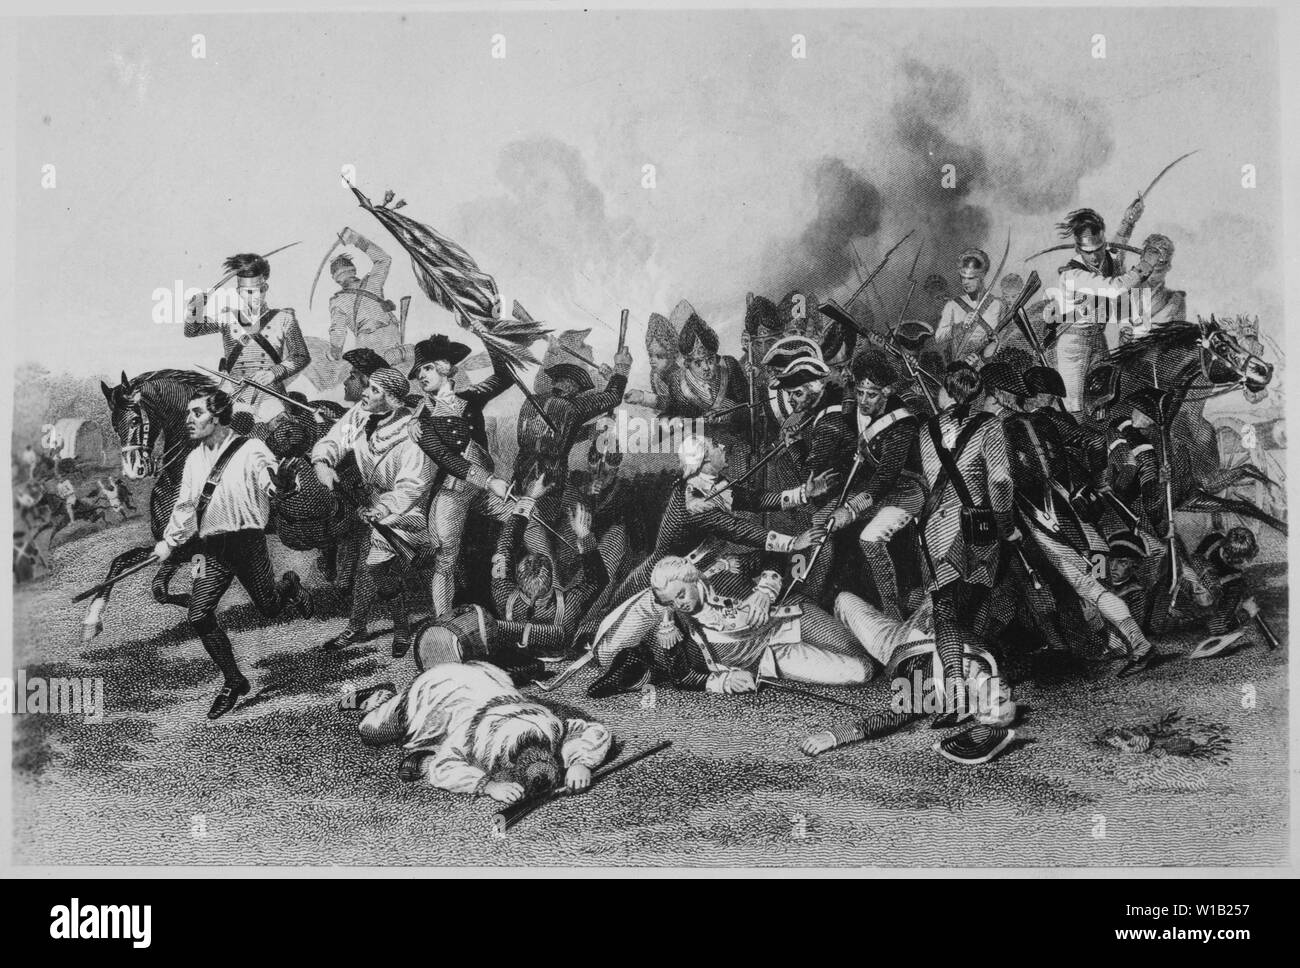 Battle of Camden-Death of De Kalb. August 1780. Copy of engraving after Alonzo Chappel., 1931 - 1932; General notes:  Use War and Conflict Number 41 when ordering a reproduction or requesting information about this image. Stock Photo